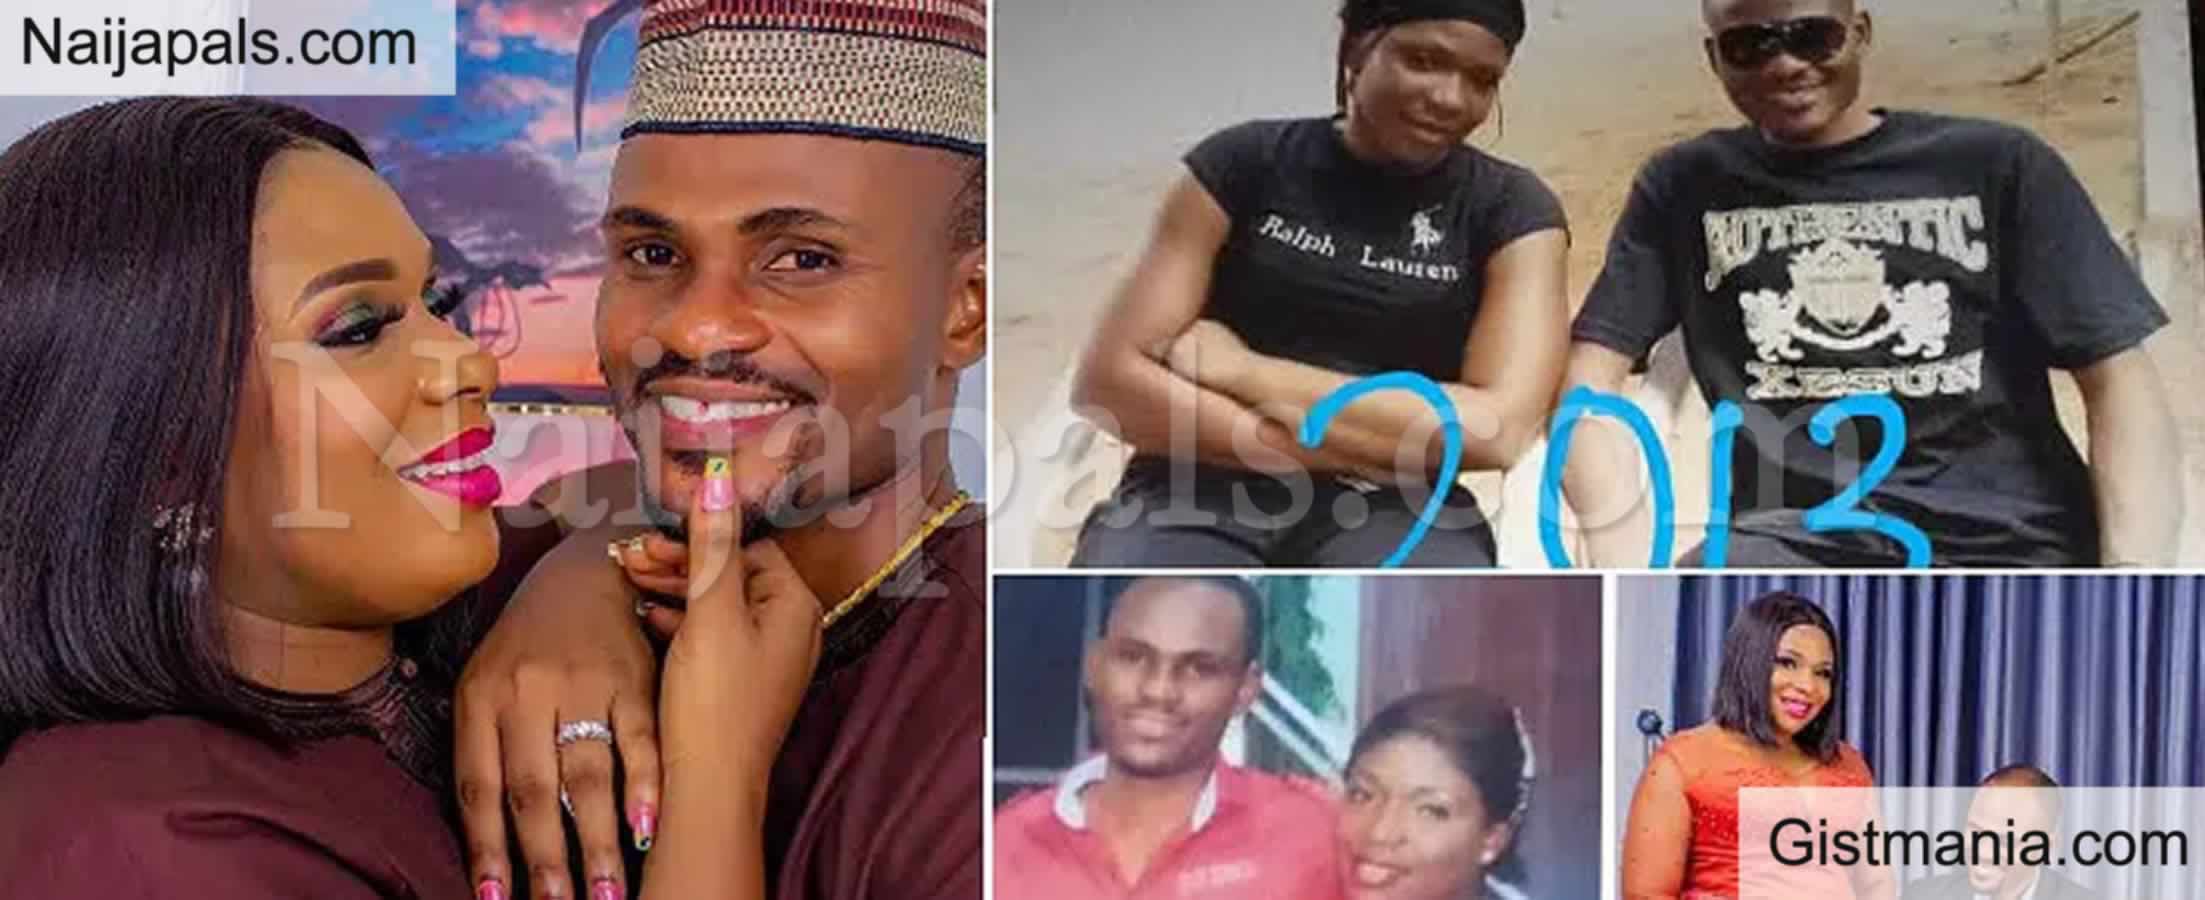 <img alt='.' class='lazyload' data-src='https://img.gistmania.com/emot/love.gif' /> PICS: <b>"Destiny Can't Be Denied" - Nigerian Lady Set To Finally Wed Lover After Dating For 13yrs</b>